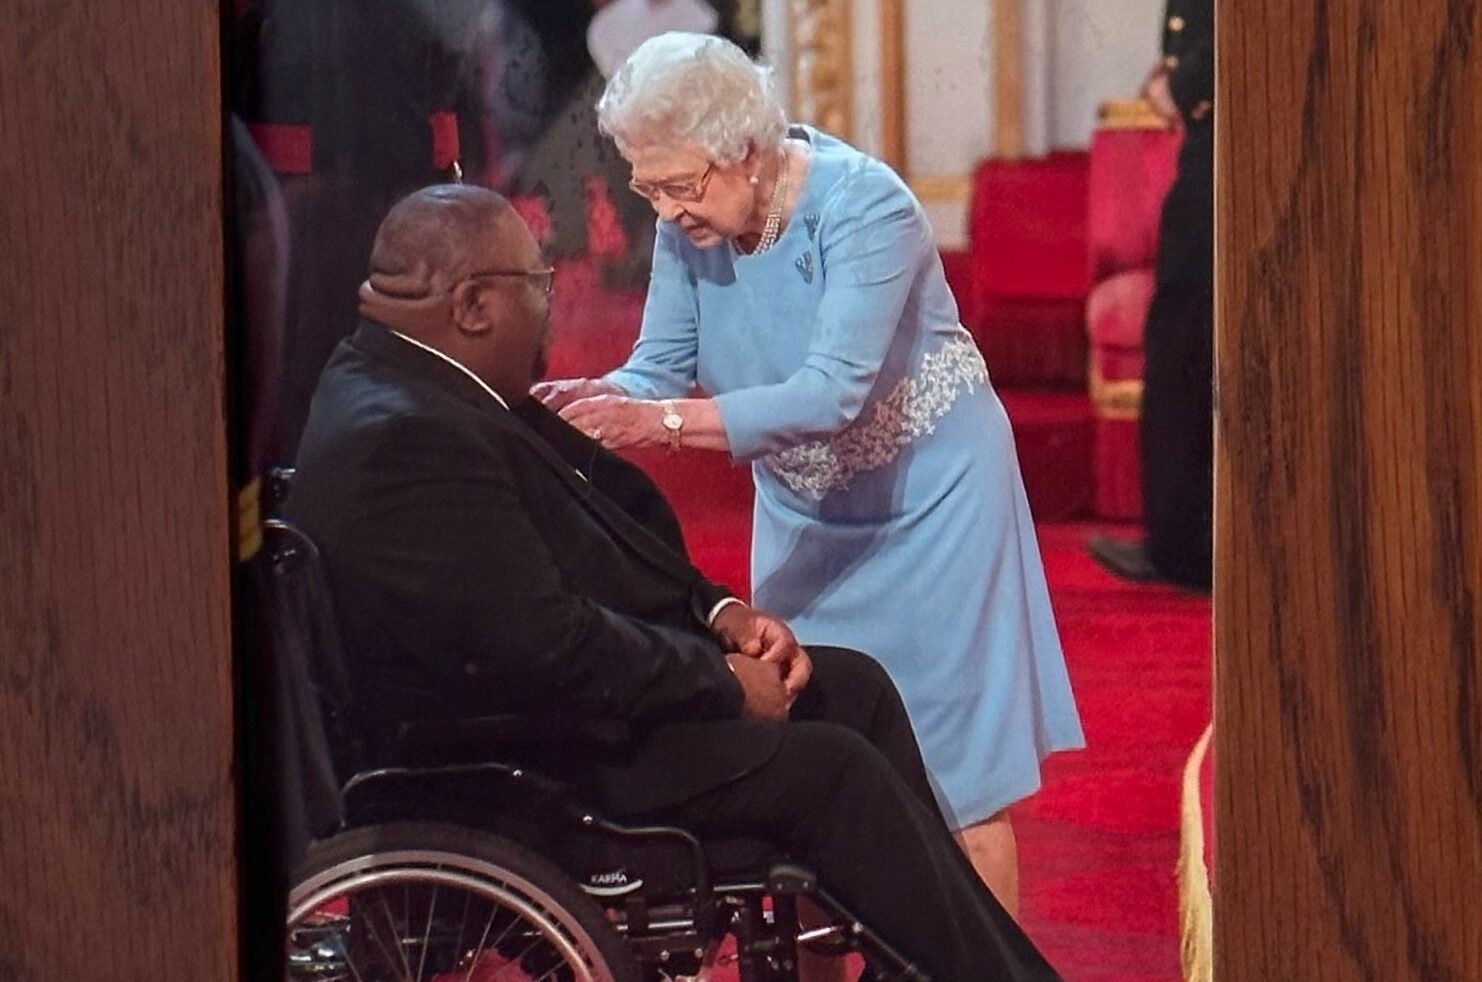 Clenton receiving his MBE for services to people with disabilities from the Queen in 2014.